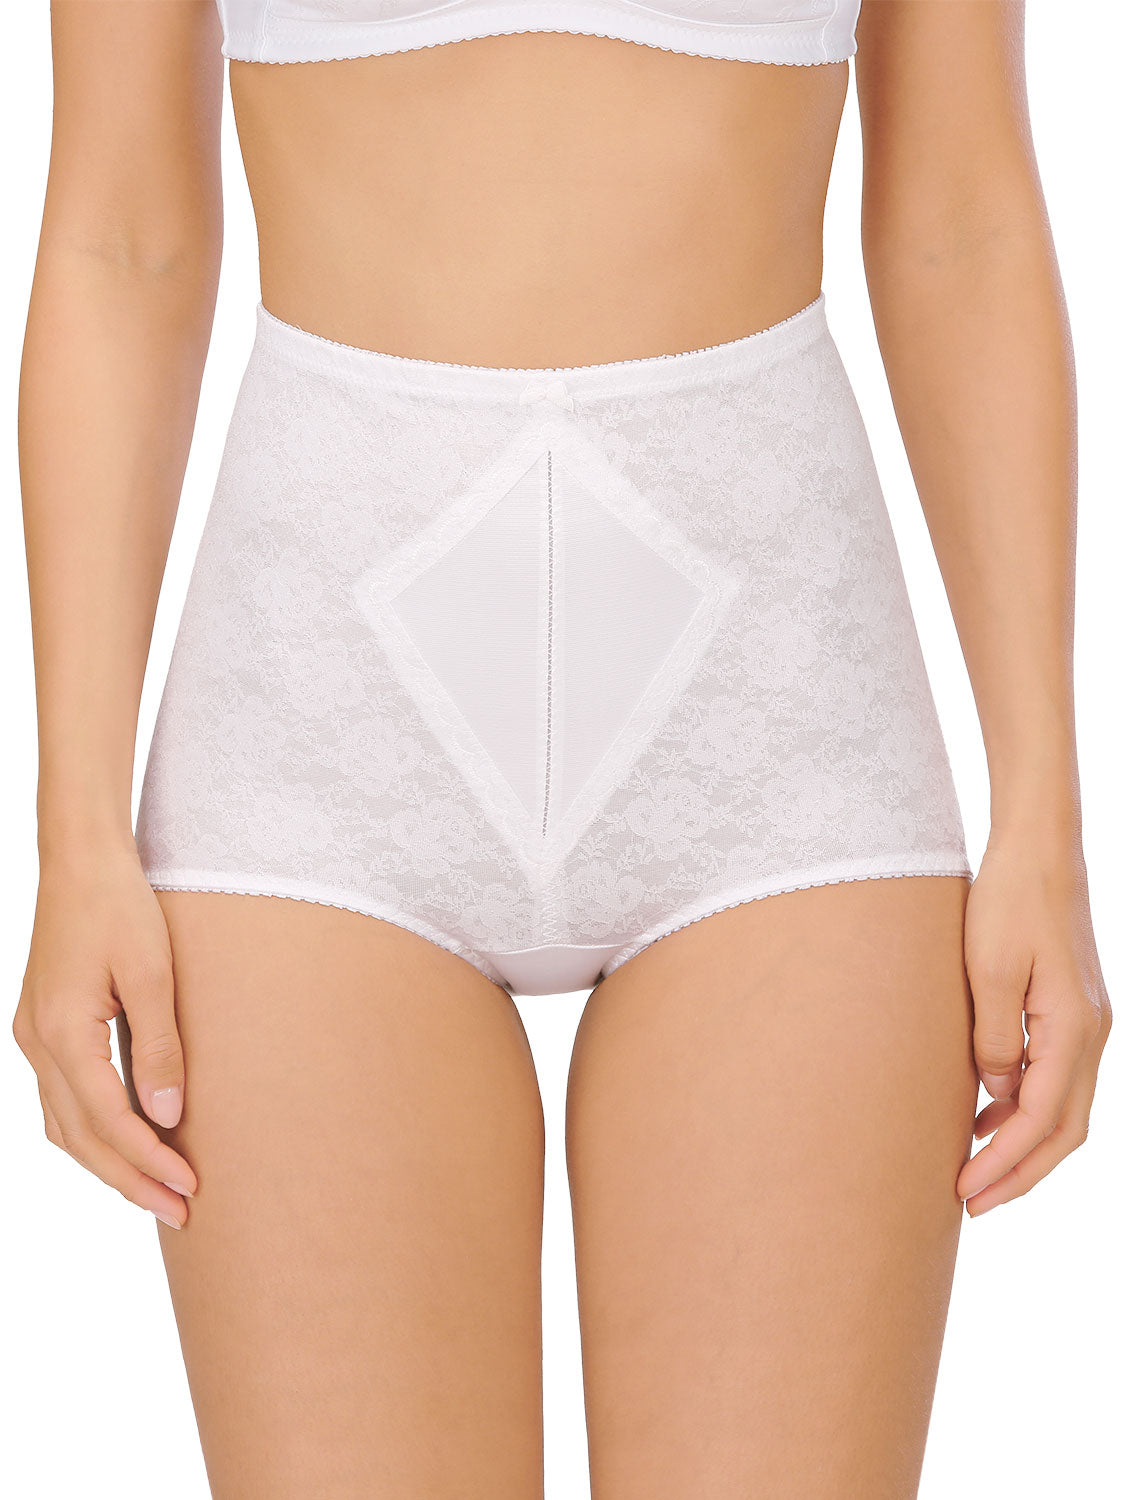 Naturana Ladies panty corselette Style 3033 – Charles Fay